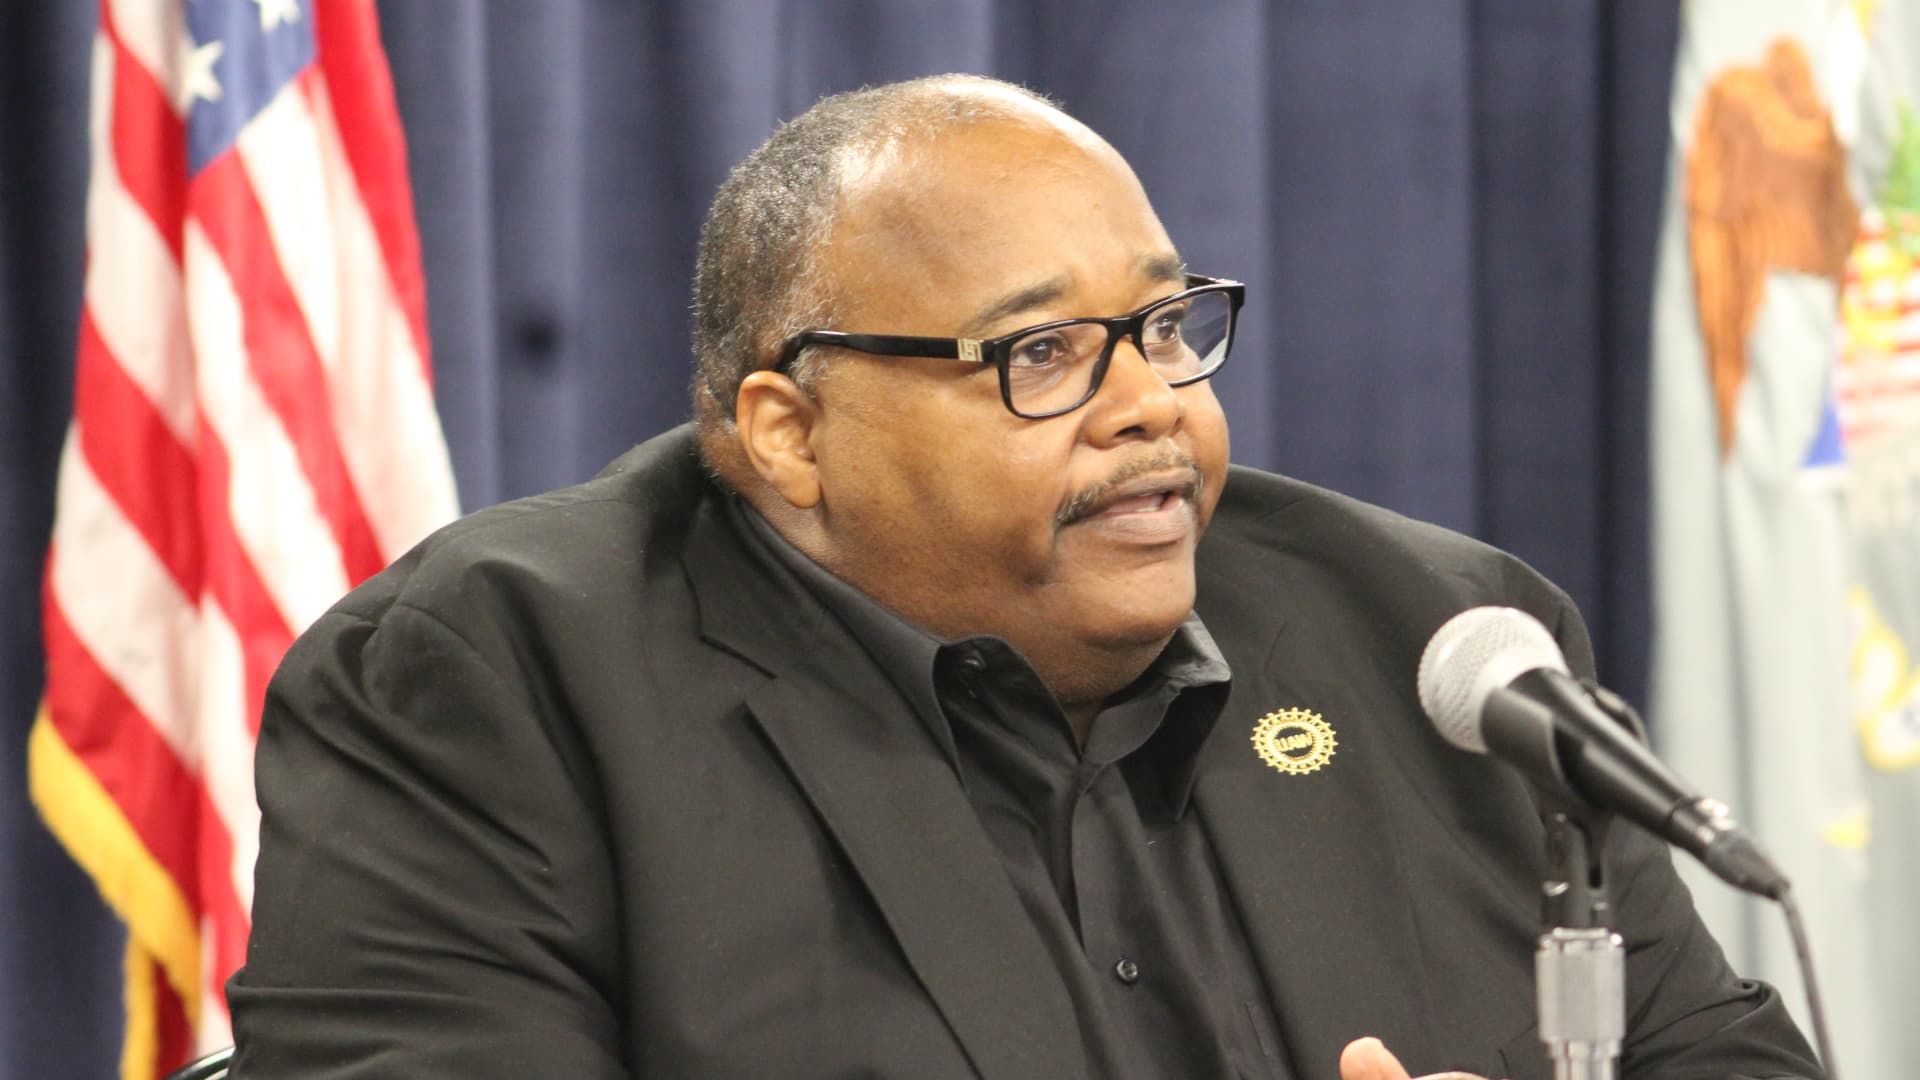 UAW President Rory Gamble speaks during a press conference with the U.S. Department of Justice regarding a settlement with the union of a federal corruption probe on Dec. 14, 2020 in Detroit.